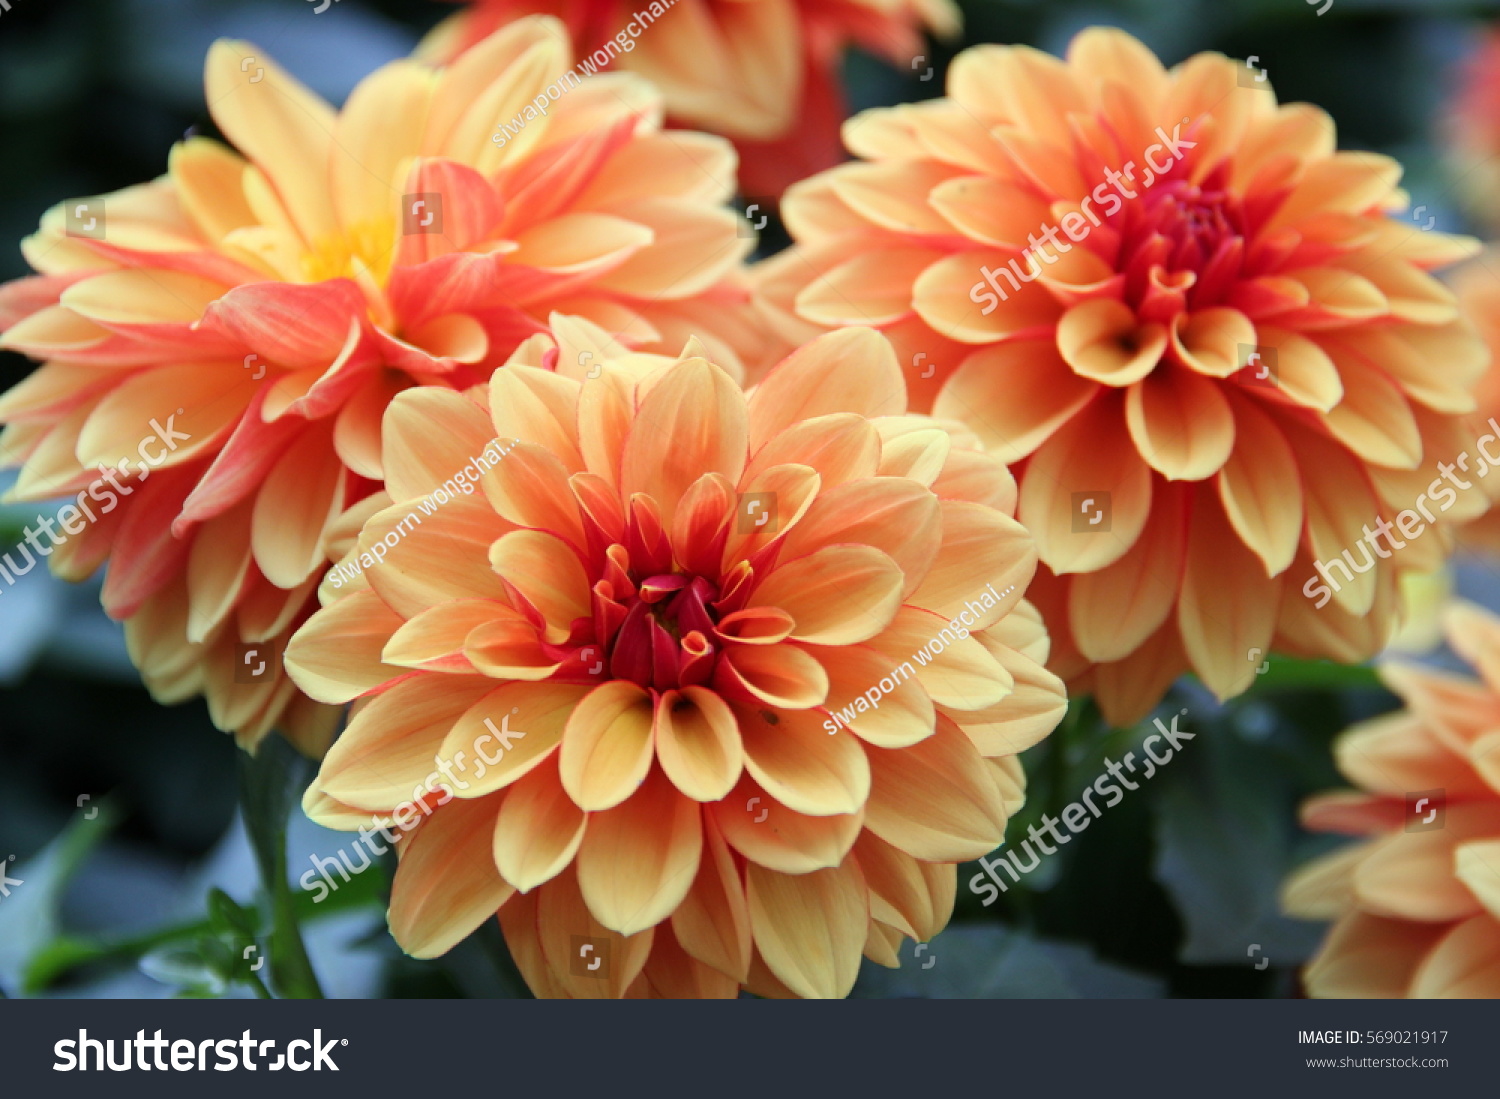 Dahlia flower are colorful and orange . #569021917